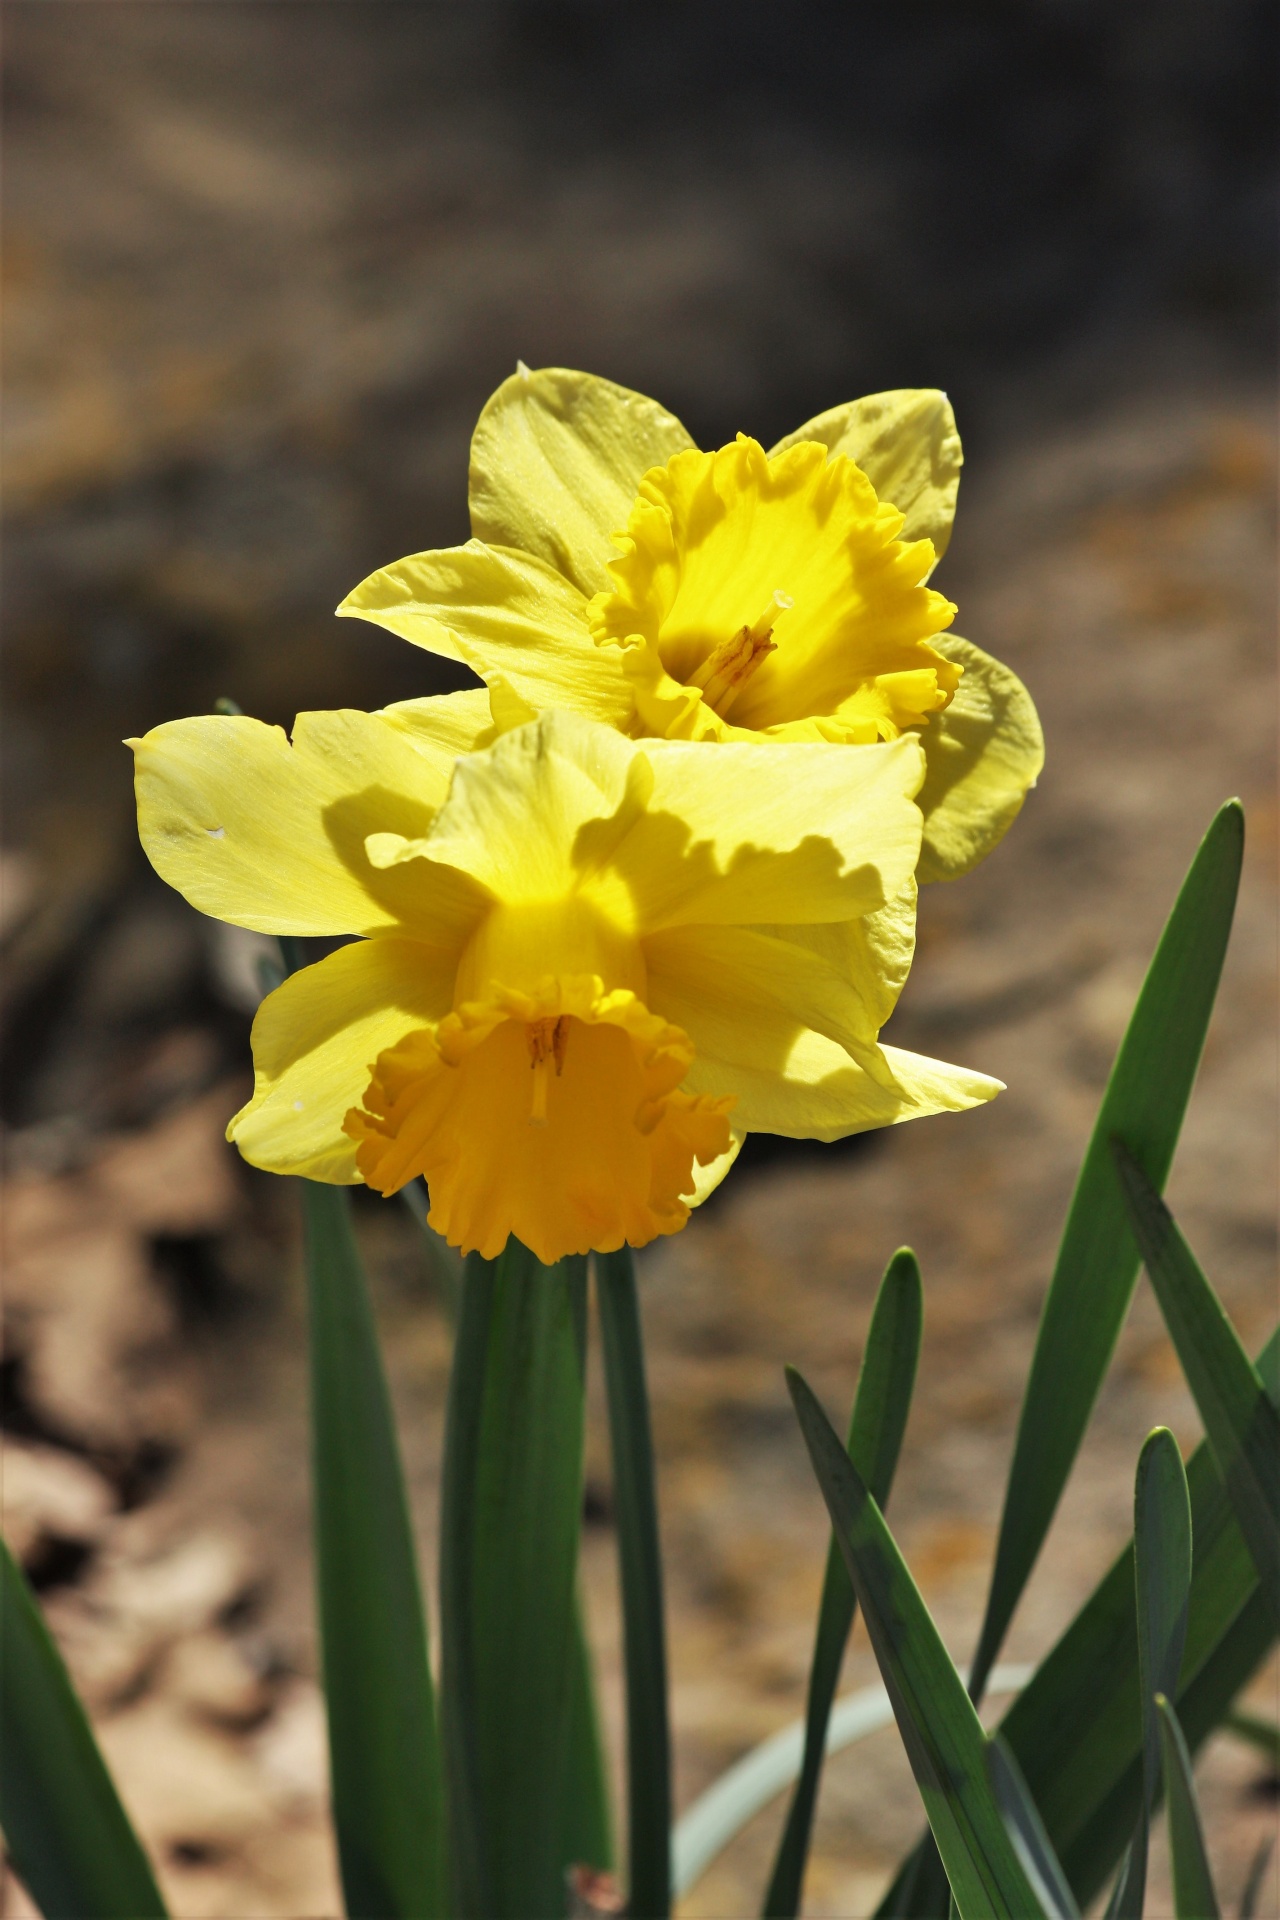 Close-up of two bright yellow daffodils with green leaves on a blurred dark background.